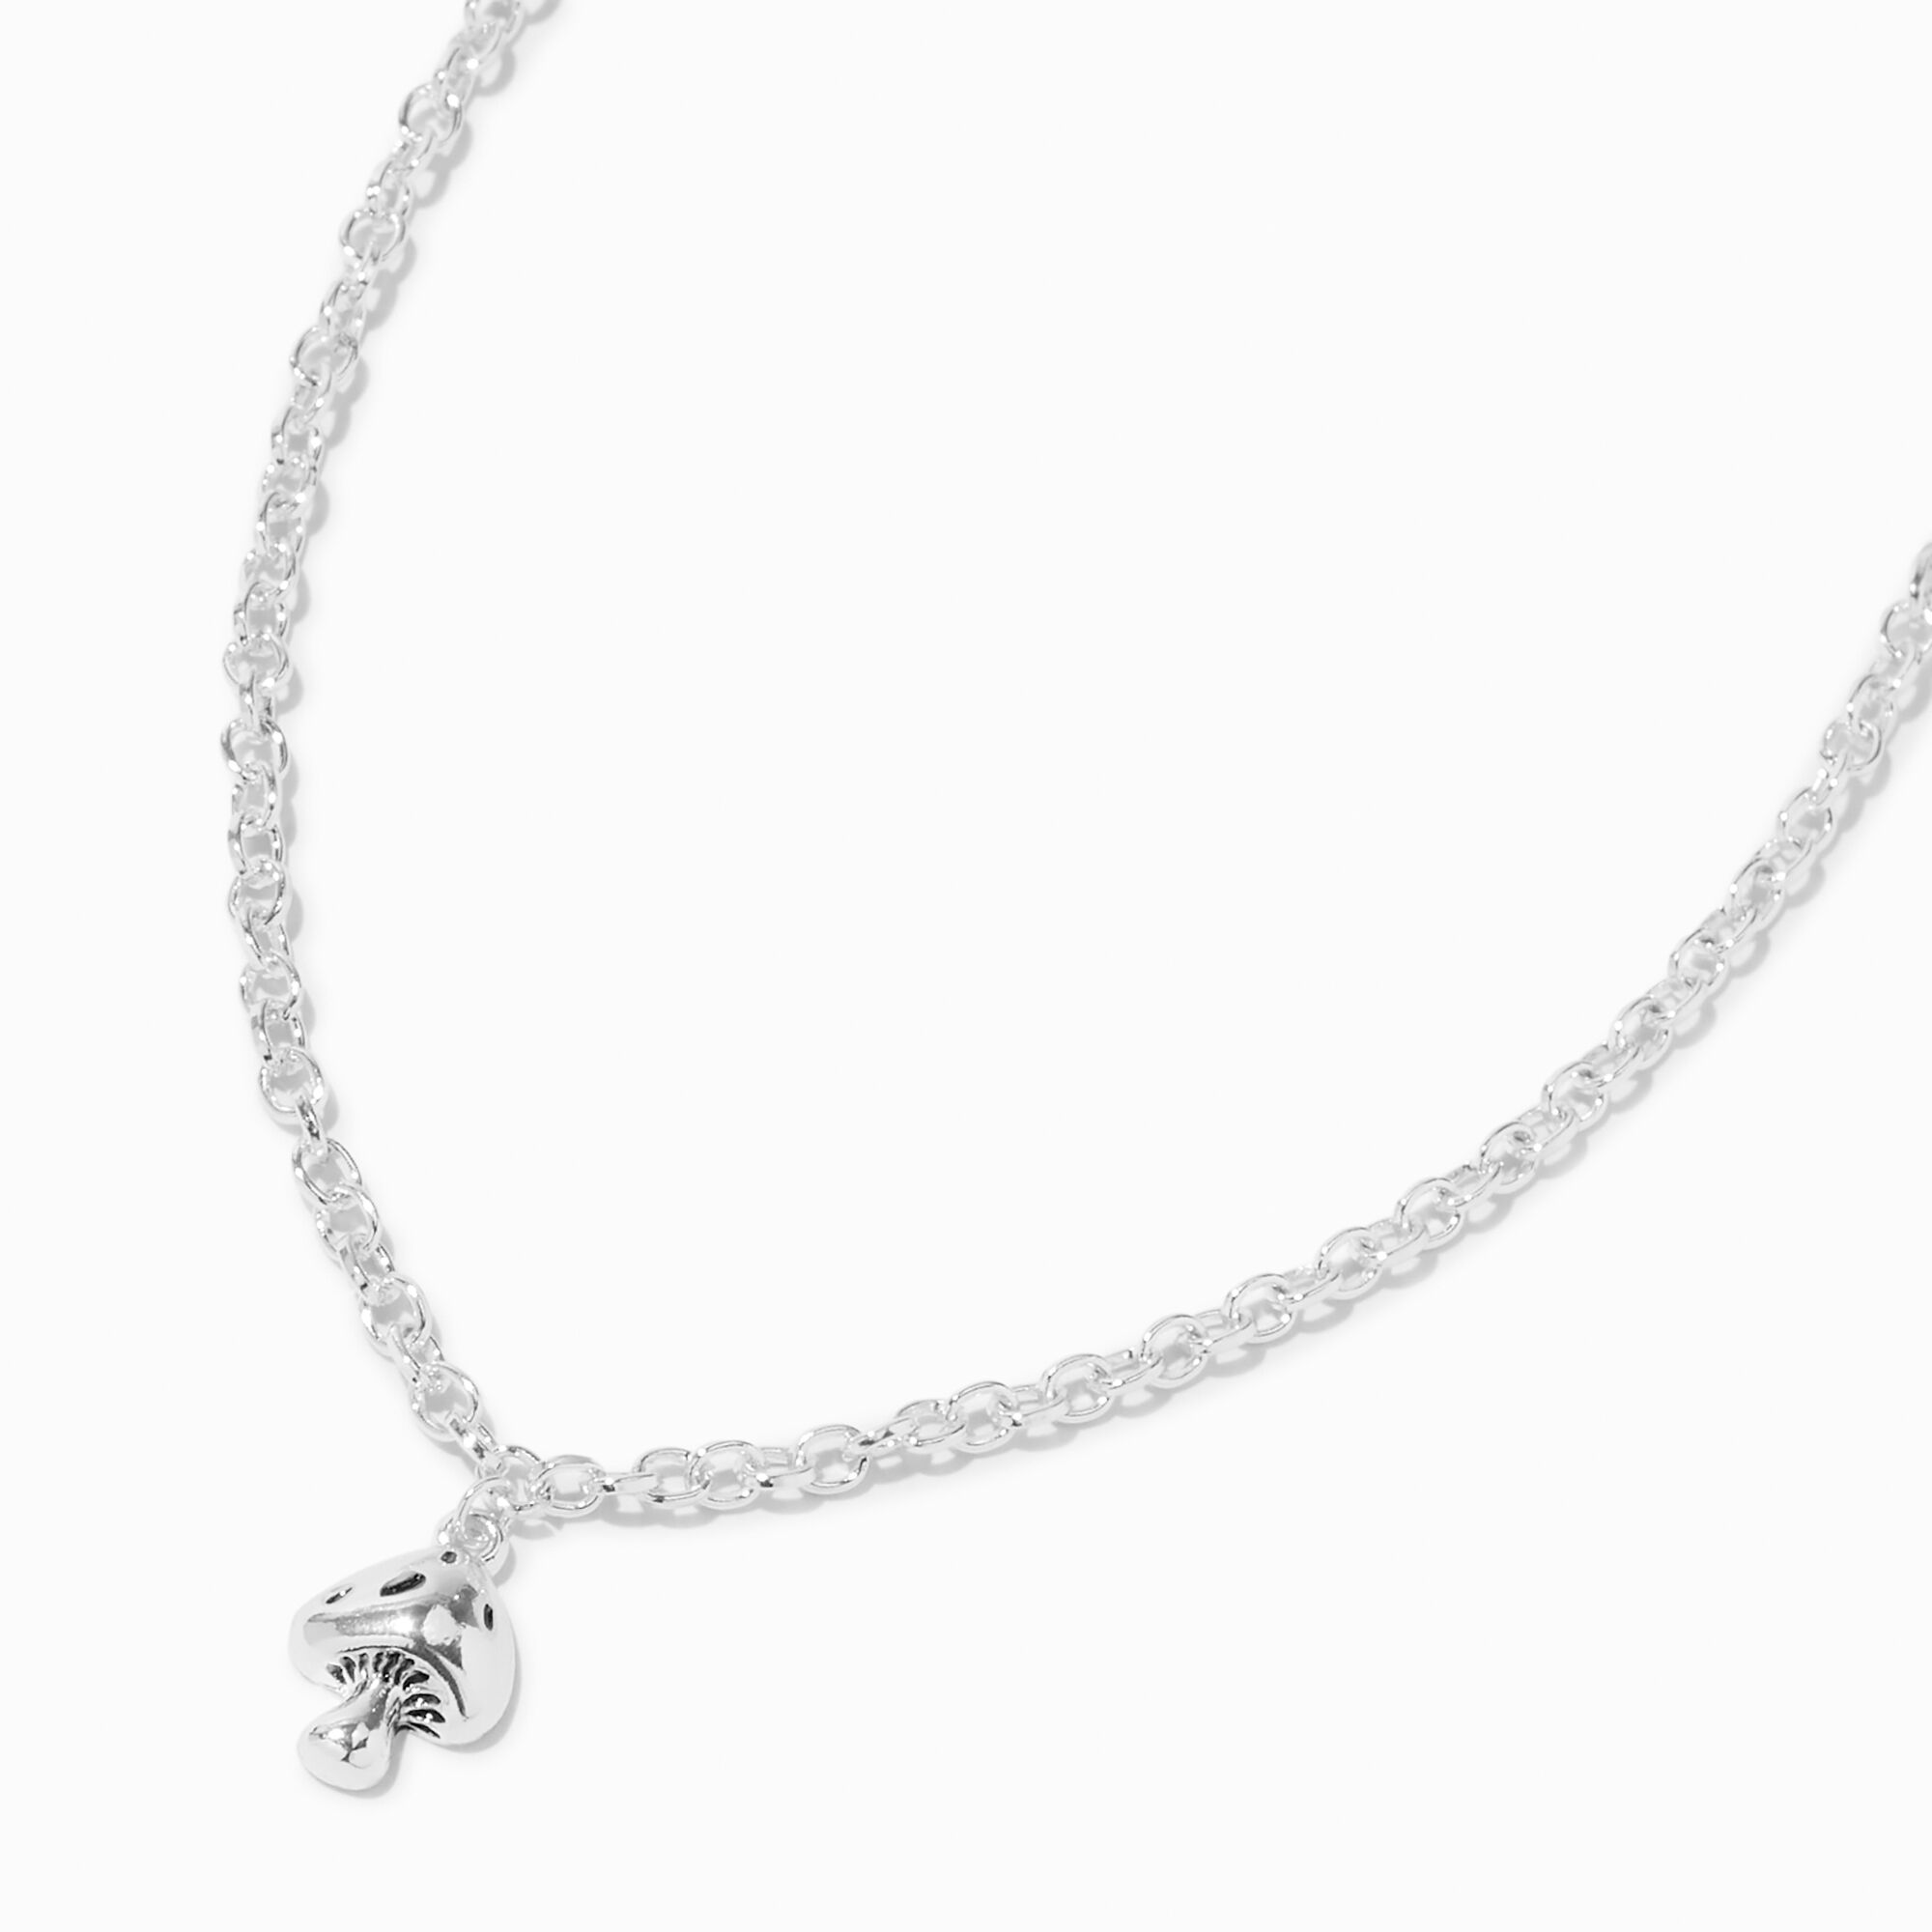 View Claires Tone Mushroom Pendant Necklace Silver information